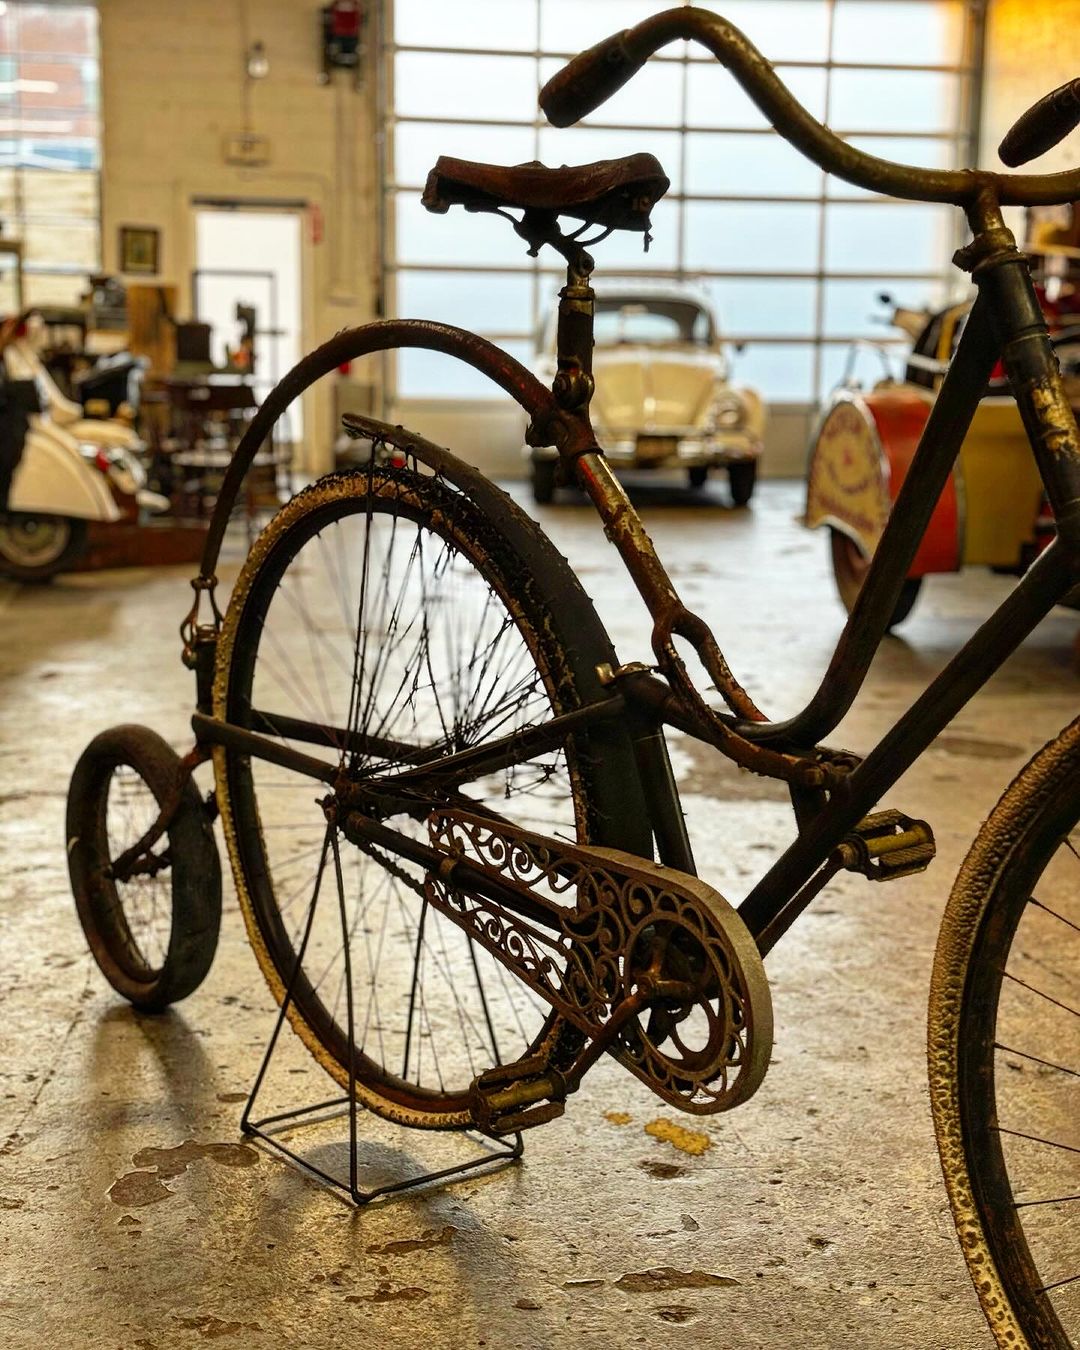 The three-wheel 1898 Rex Bicycle was placed inside Mike's store in Tennessee